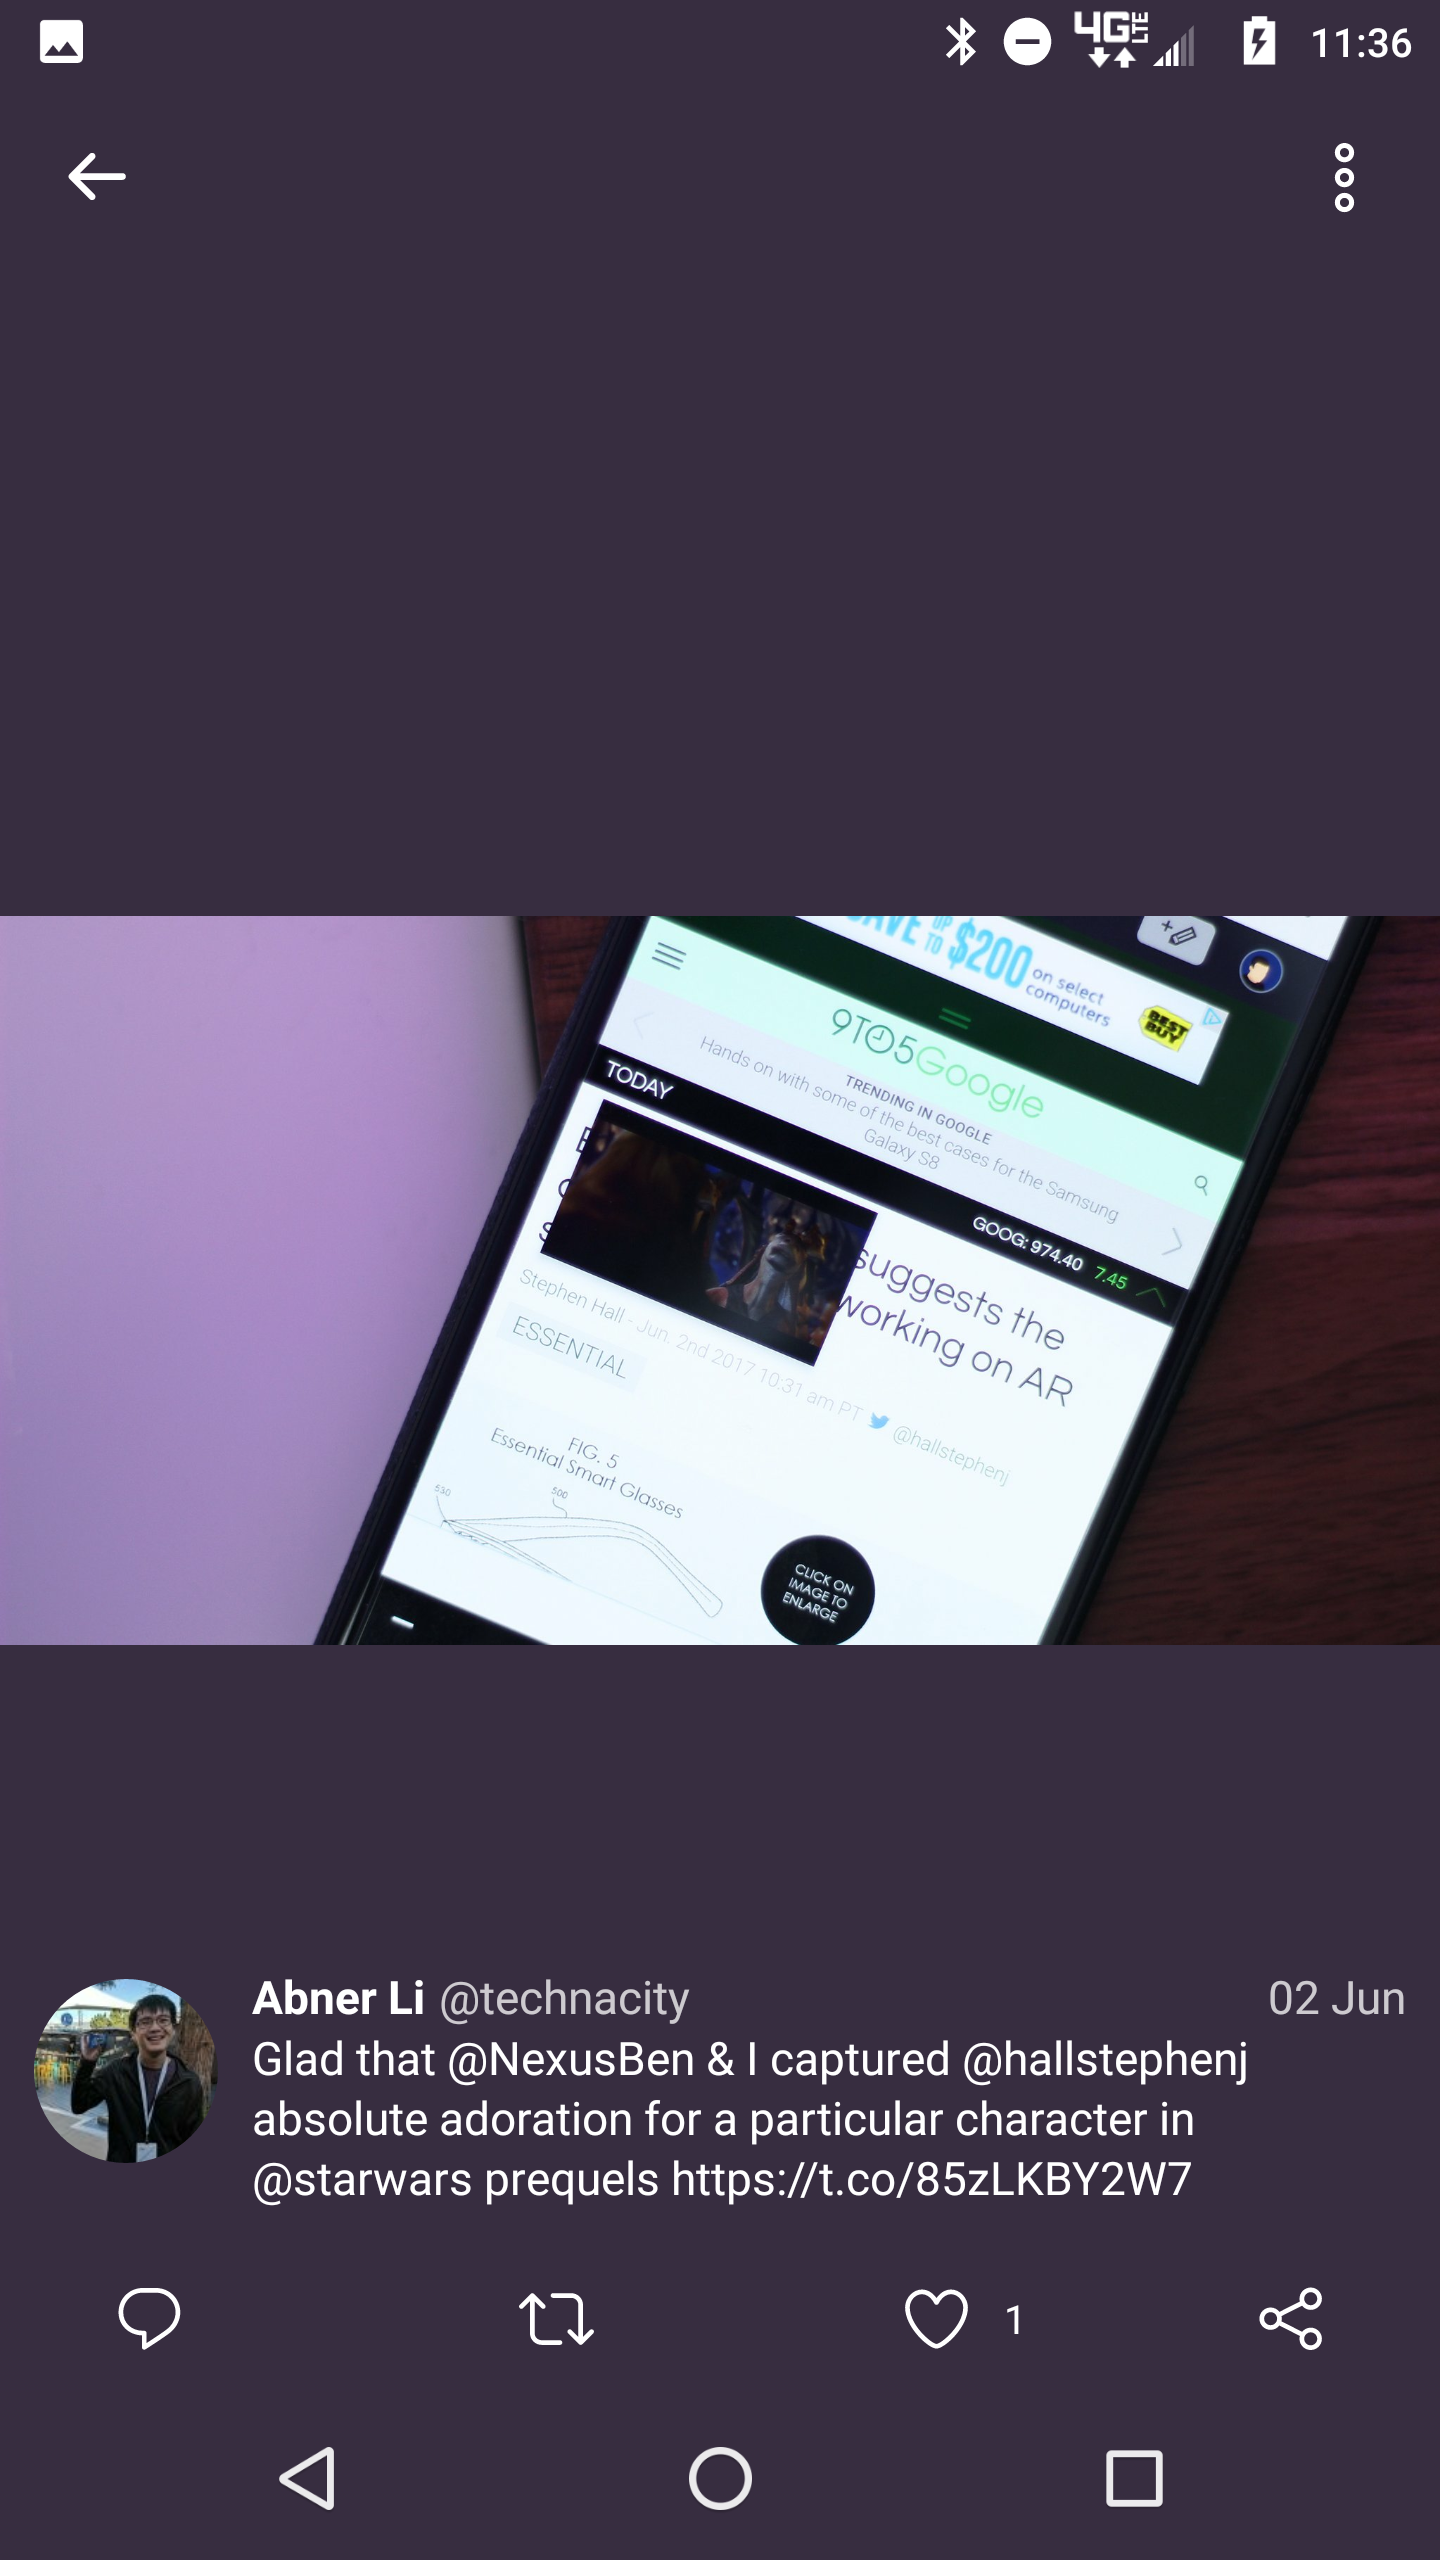  twitter-android-7-redesign-11